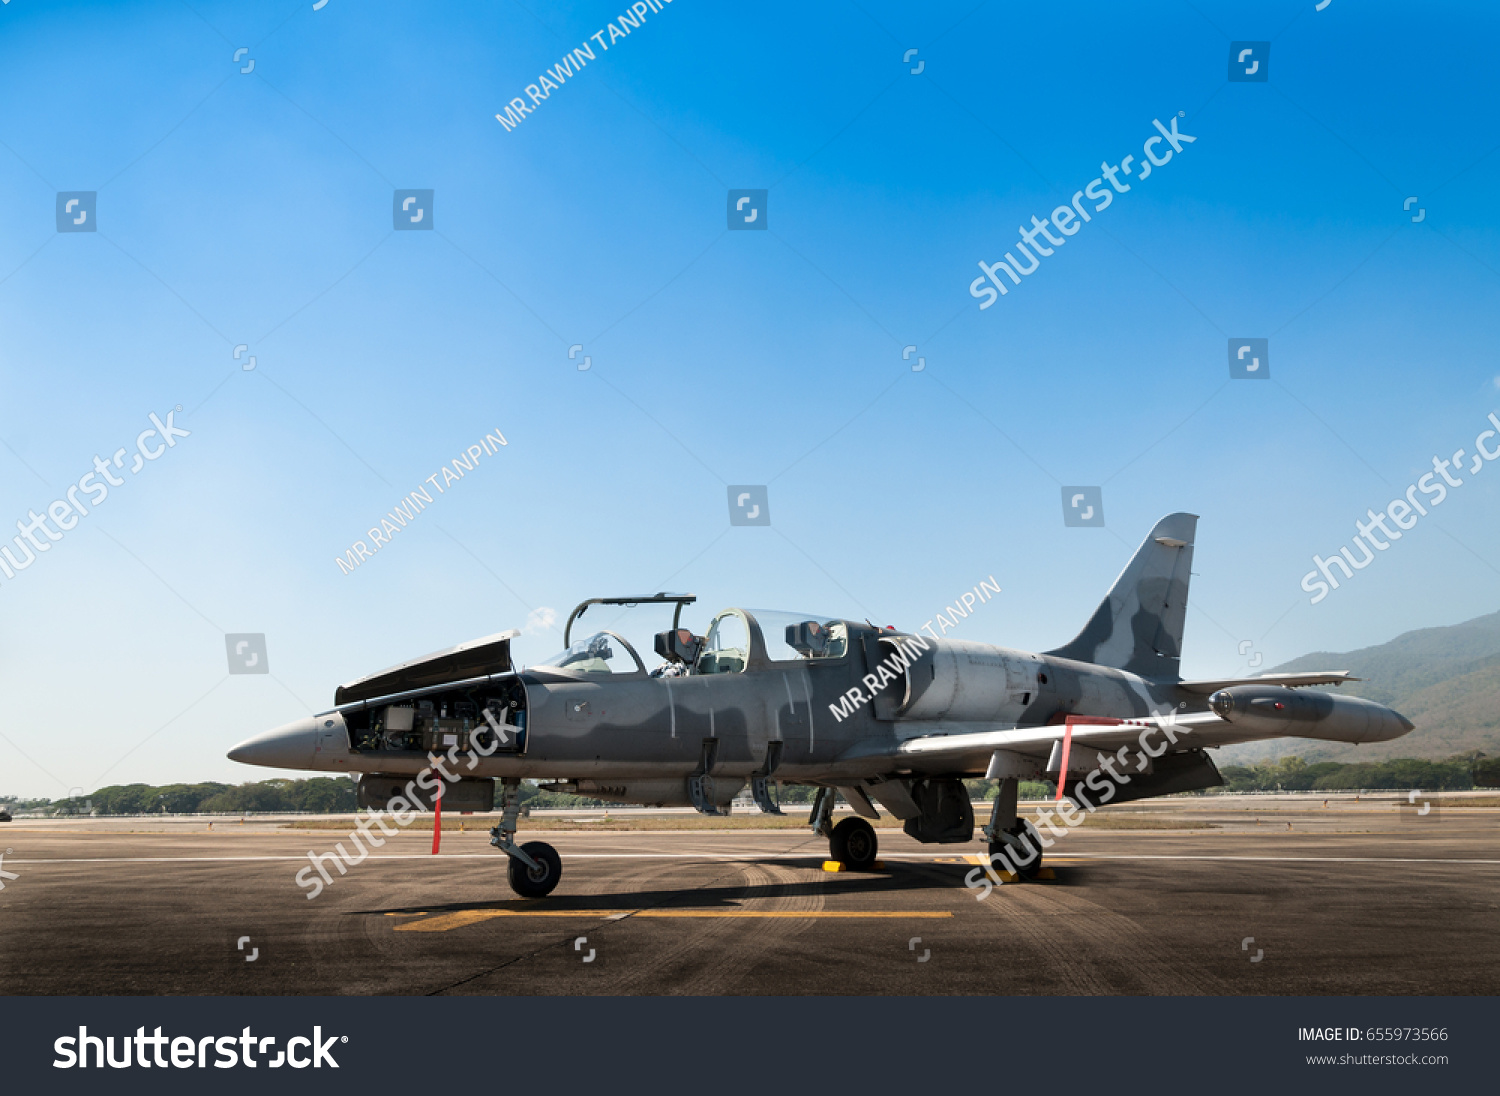 F-16 fighter jet plane of Royal air force ,aircraft on runway #655973566